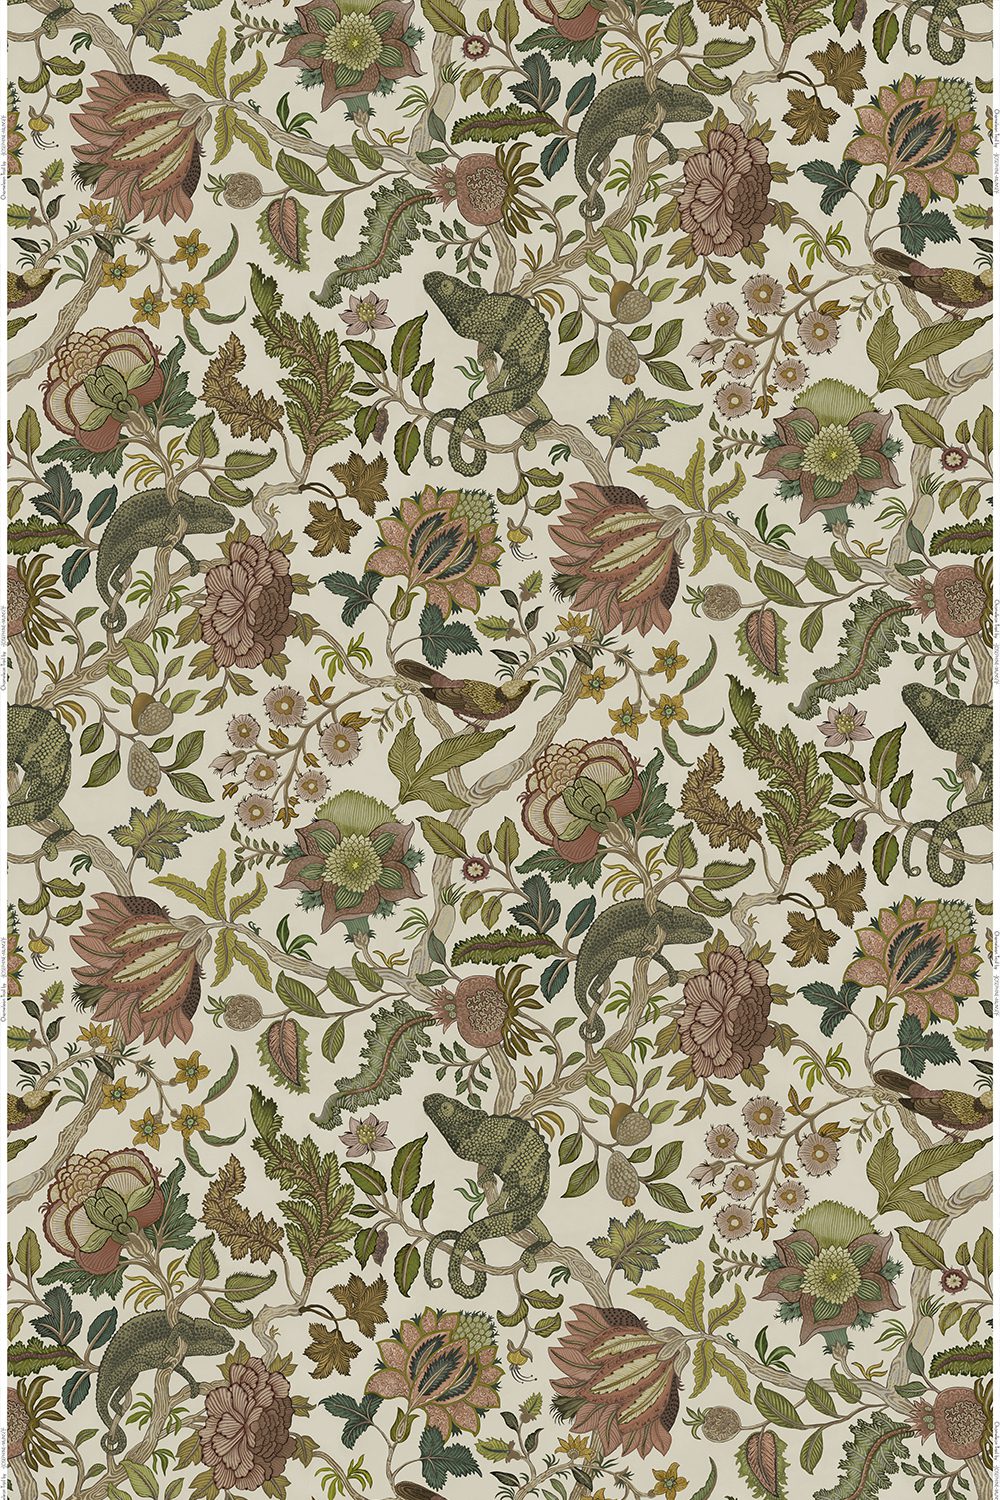 JMF-202251-PLN | Chameleon Trail | Dusty Pinks and Olive | Pure Linen | Full Repeat